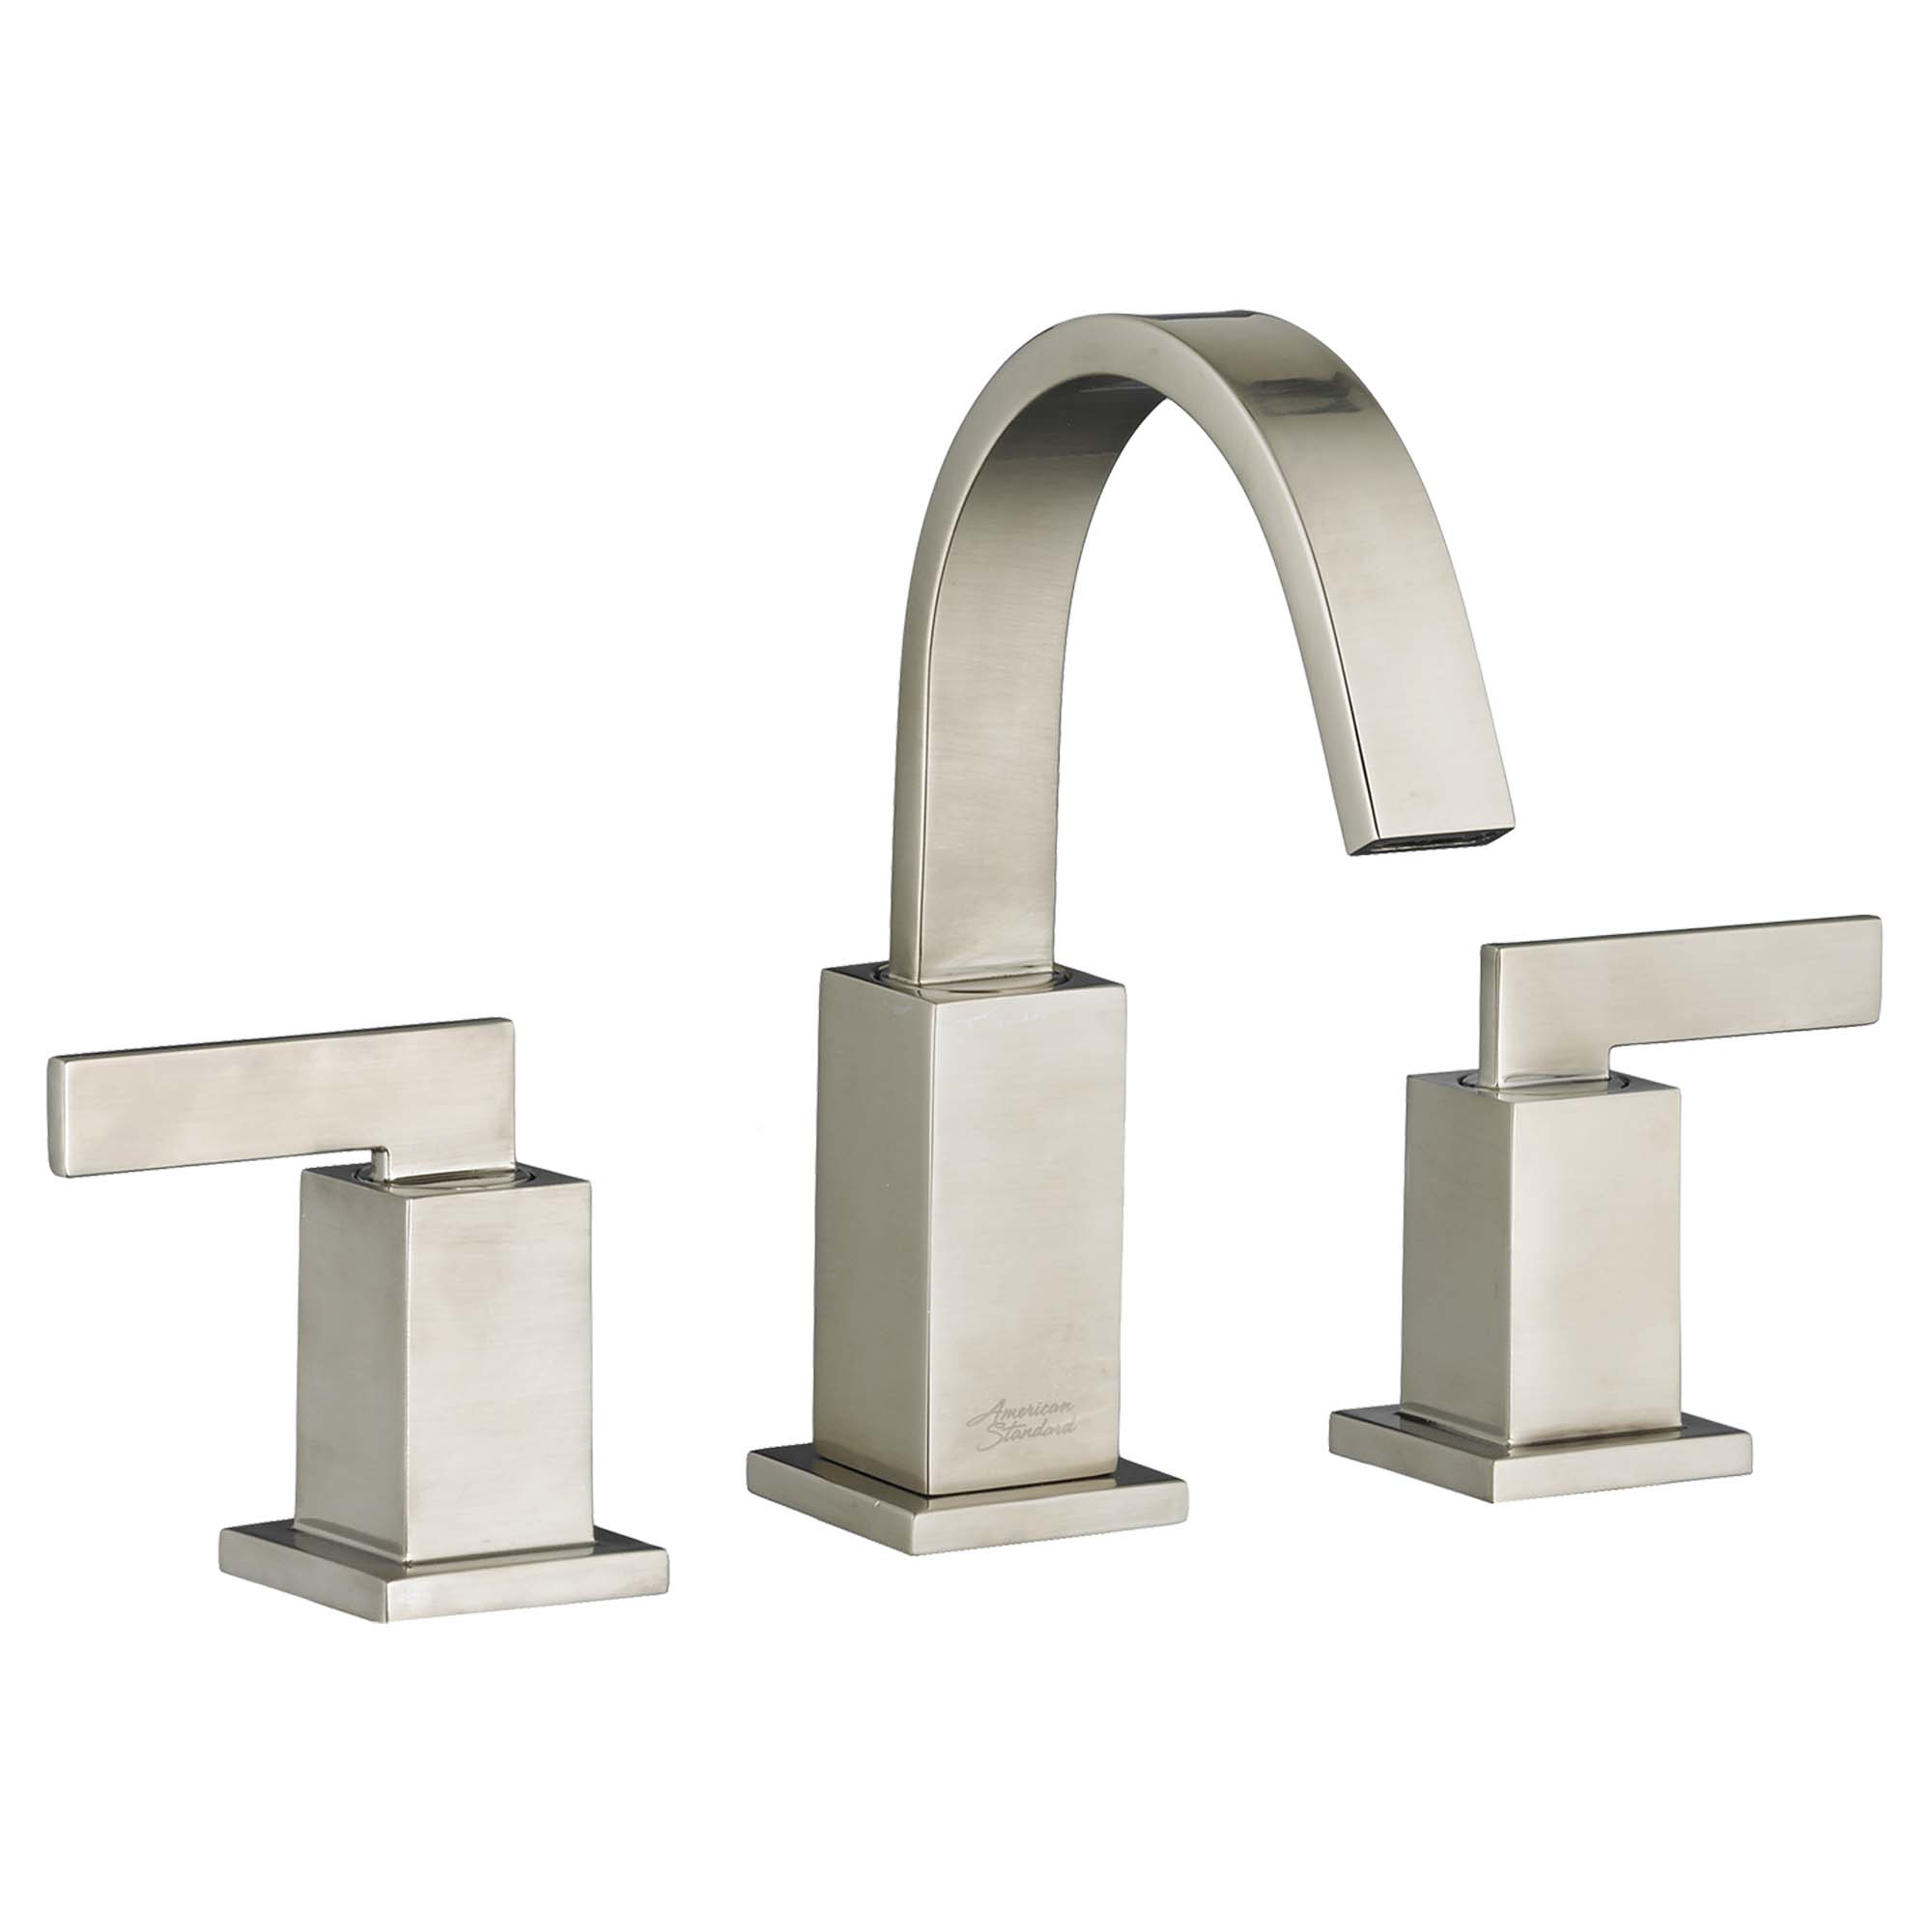 Time Square® 8-Inch Widespread 2-Handle Bathroom Faucet 1.2 gpm/4.5 L/min With Lever Handles